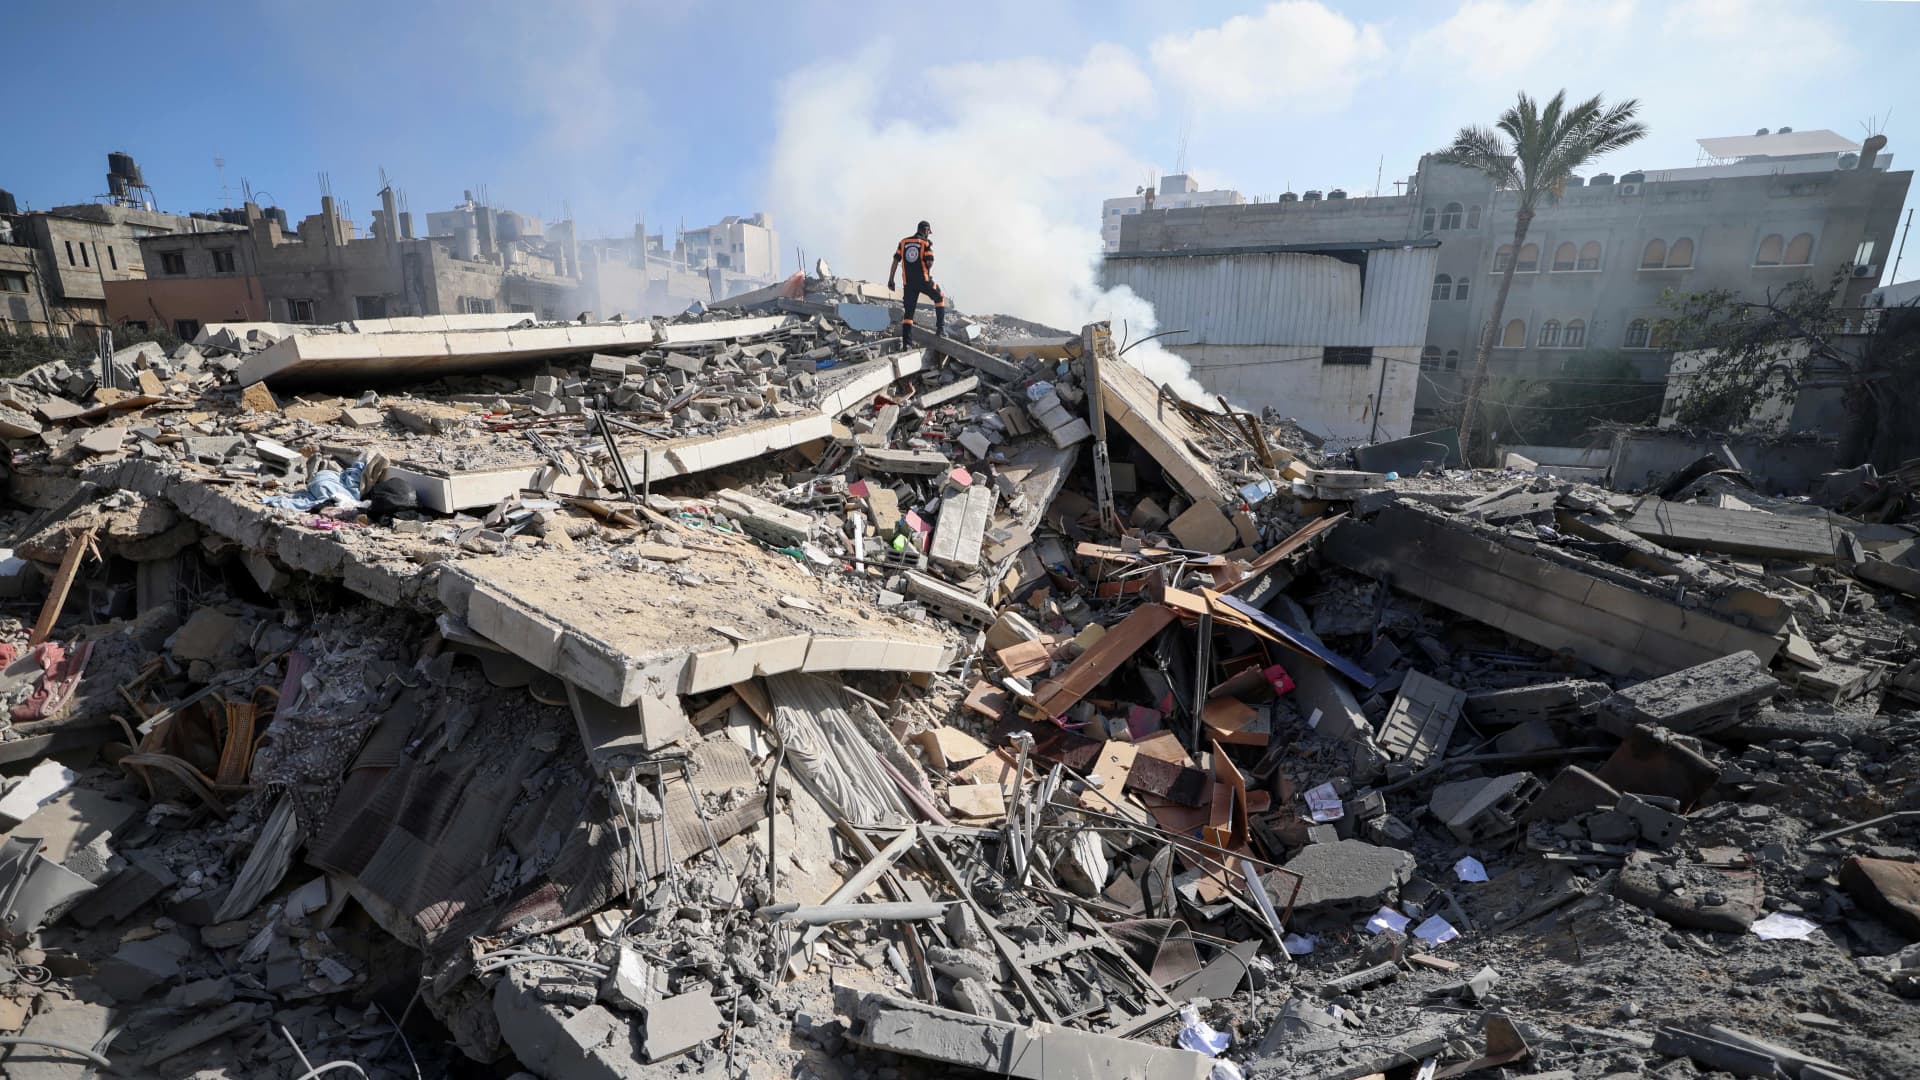 A member of the Palestinian civil defence walks amidst the rubble of a building in Gaza city which housed the Intaj Bank linked to the Hamas movement which controls the Gaza Strip, on May 15, 2021.